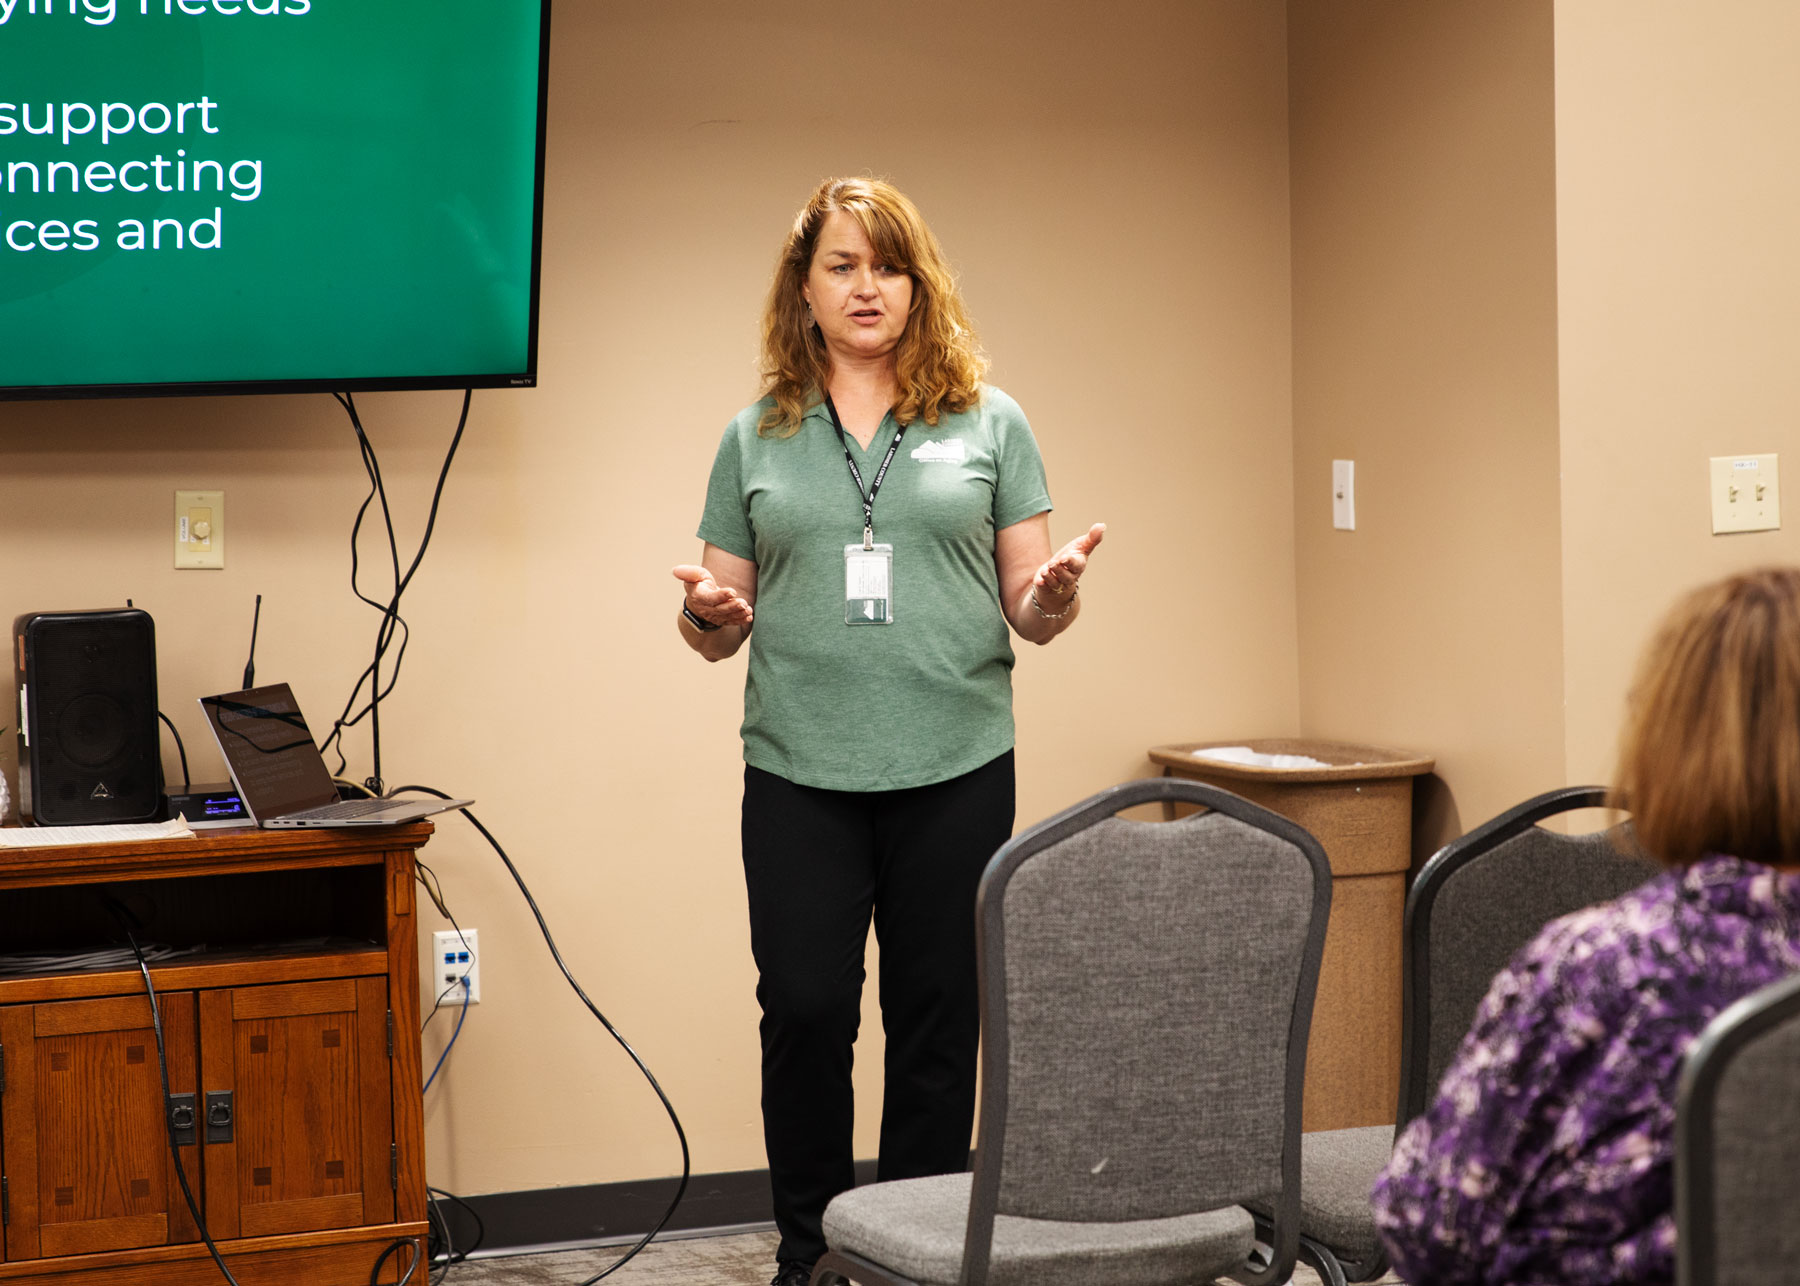 Image 10: Carol Seest from the Office on Aging presents in a breakout session.